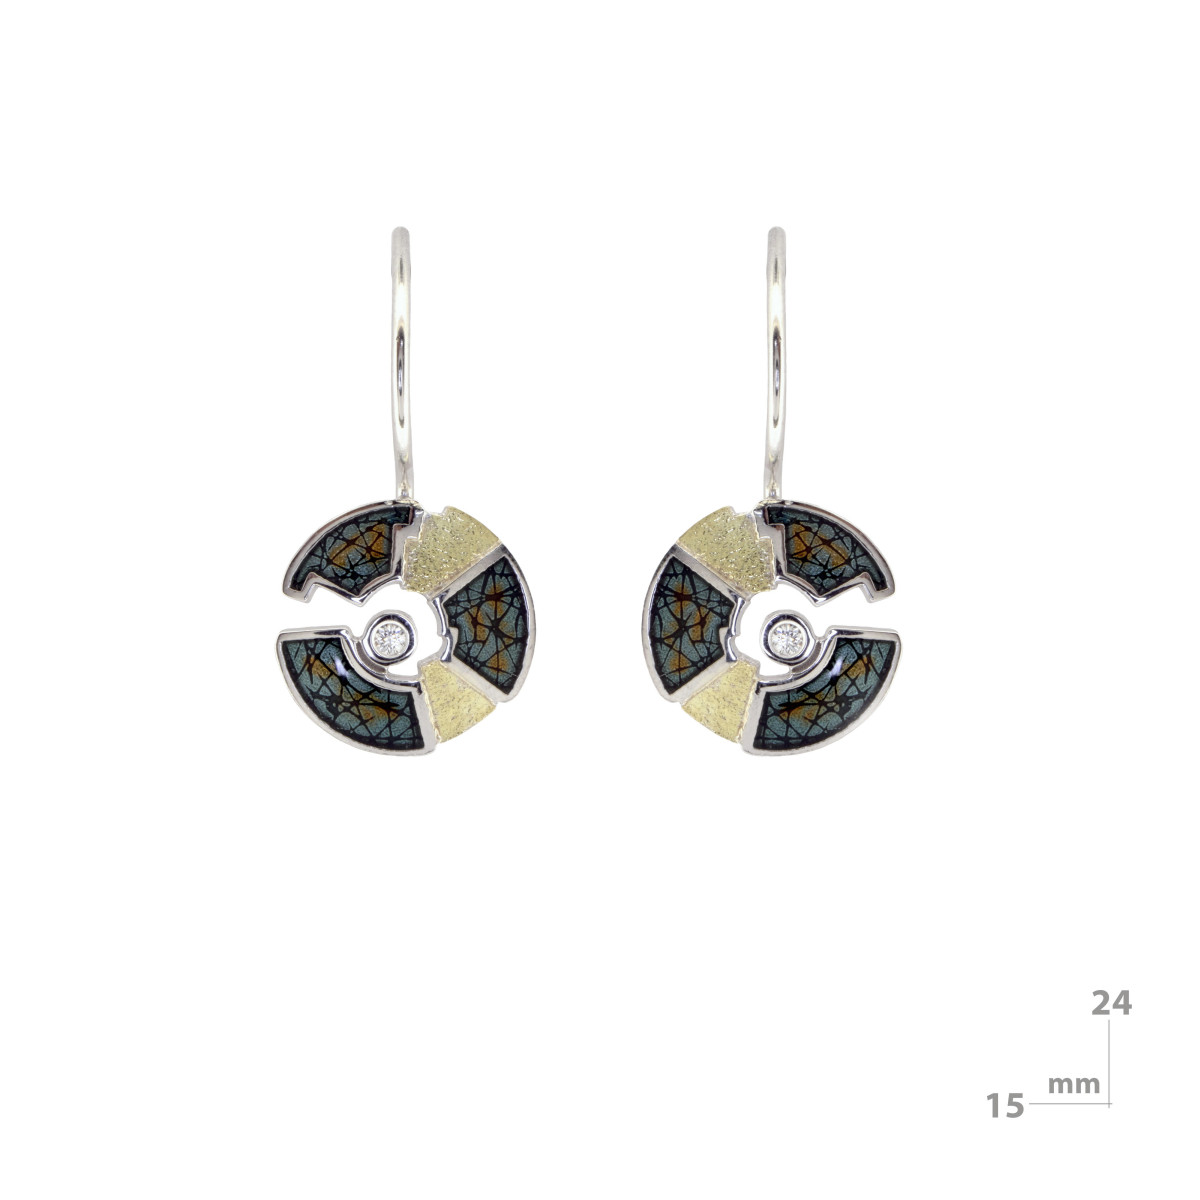 Enameled silver, gold and shiny earrings